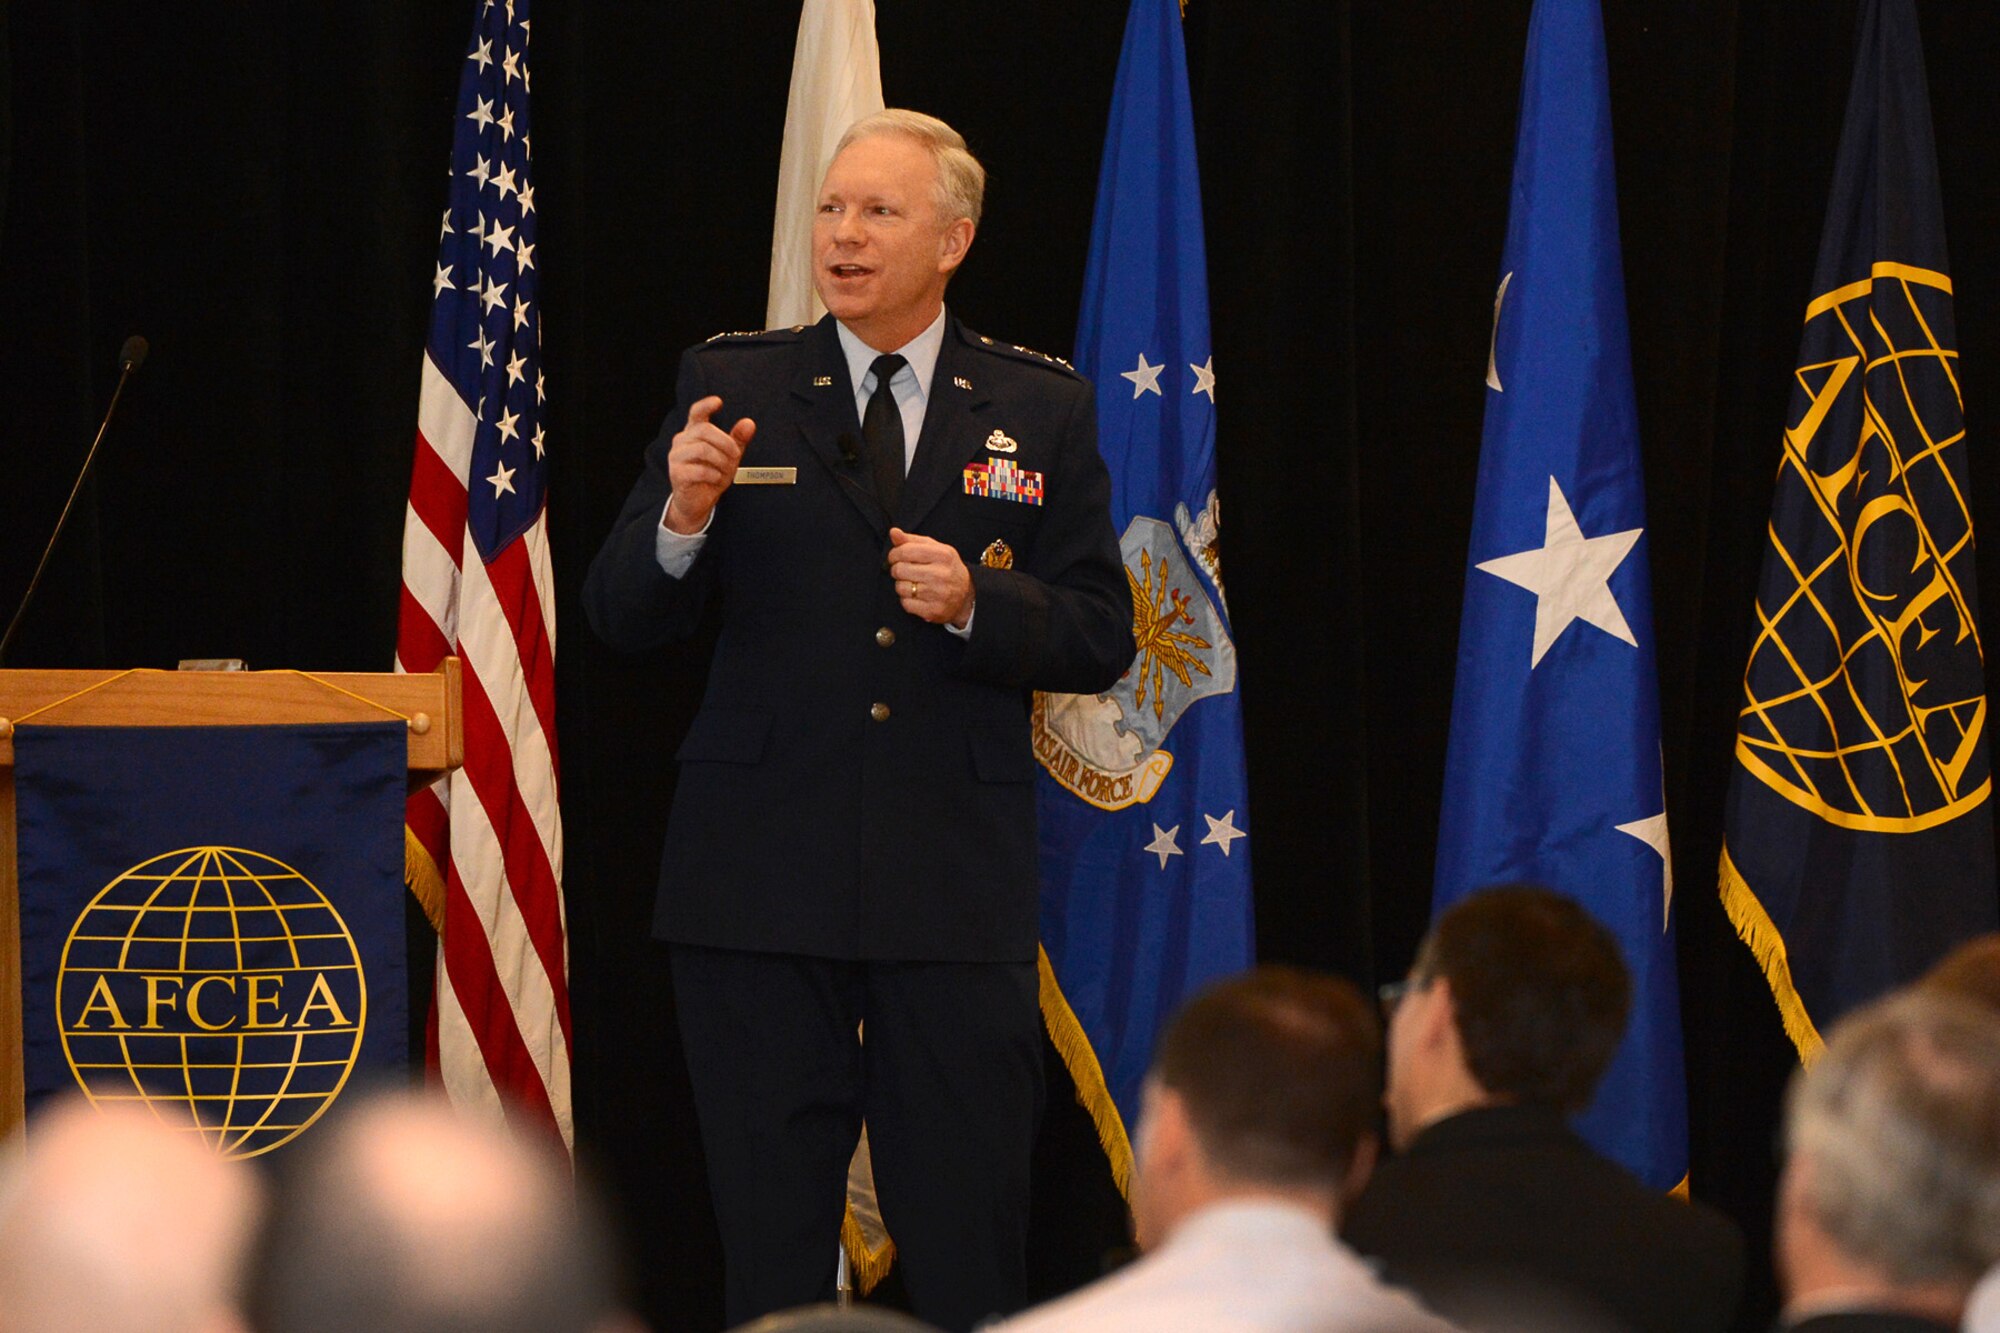 Lt. Gen. John Thompson, Air Force Life Cycle Management Center commander, speaks to attendees at the New Horizons Symposium in Newton, Mass., March 3. Thompson said the center handles more than 3,000 total projects and that they all have certain overlapping needs, including cyber competency. The symposium connects government and industry with a primary focus on upcoming program opportunities. (U.S. Air Force photo by Jerry Saslav)